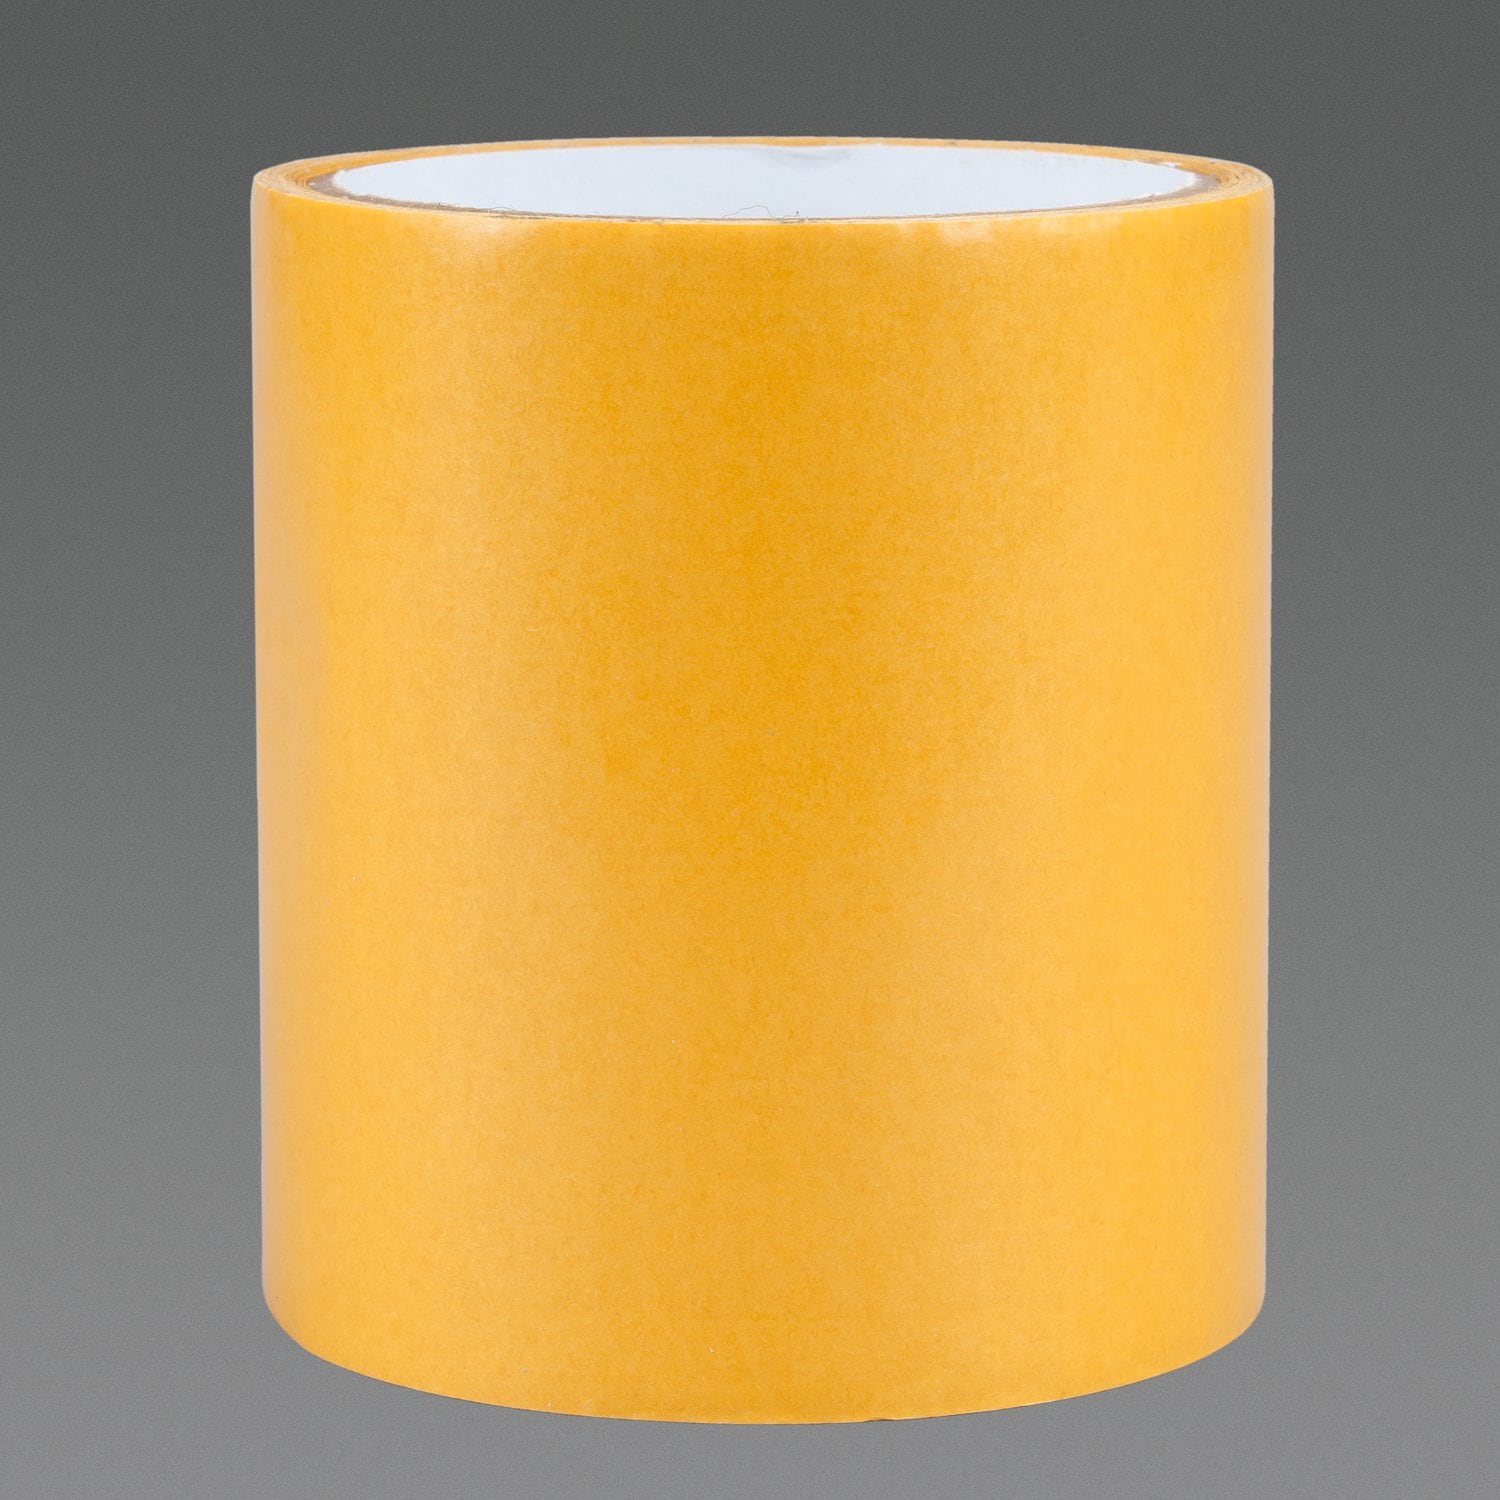 7100035869 - 3M Scrim Reinforced Adhesive Transfer Tape 97053, Clear, 60 in x 250
yd, 2.5 mil, 1 roll per pallet